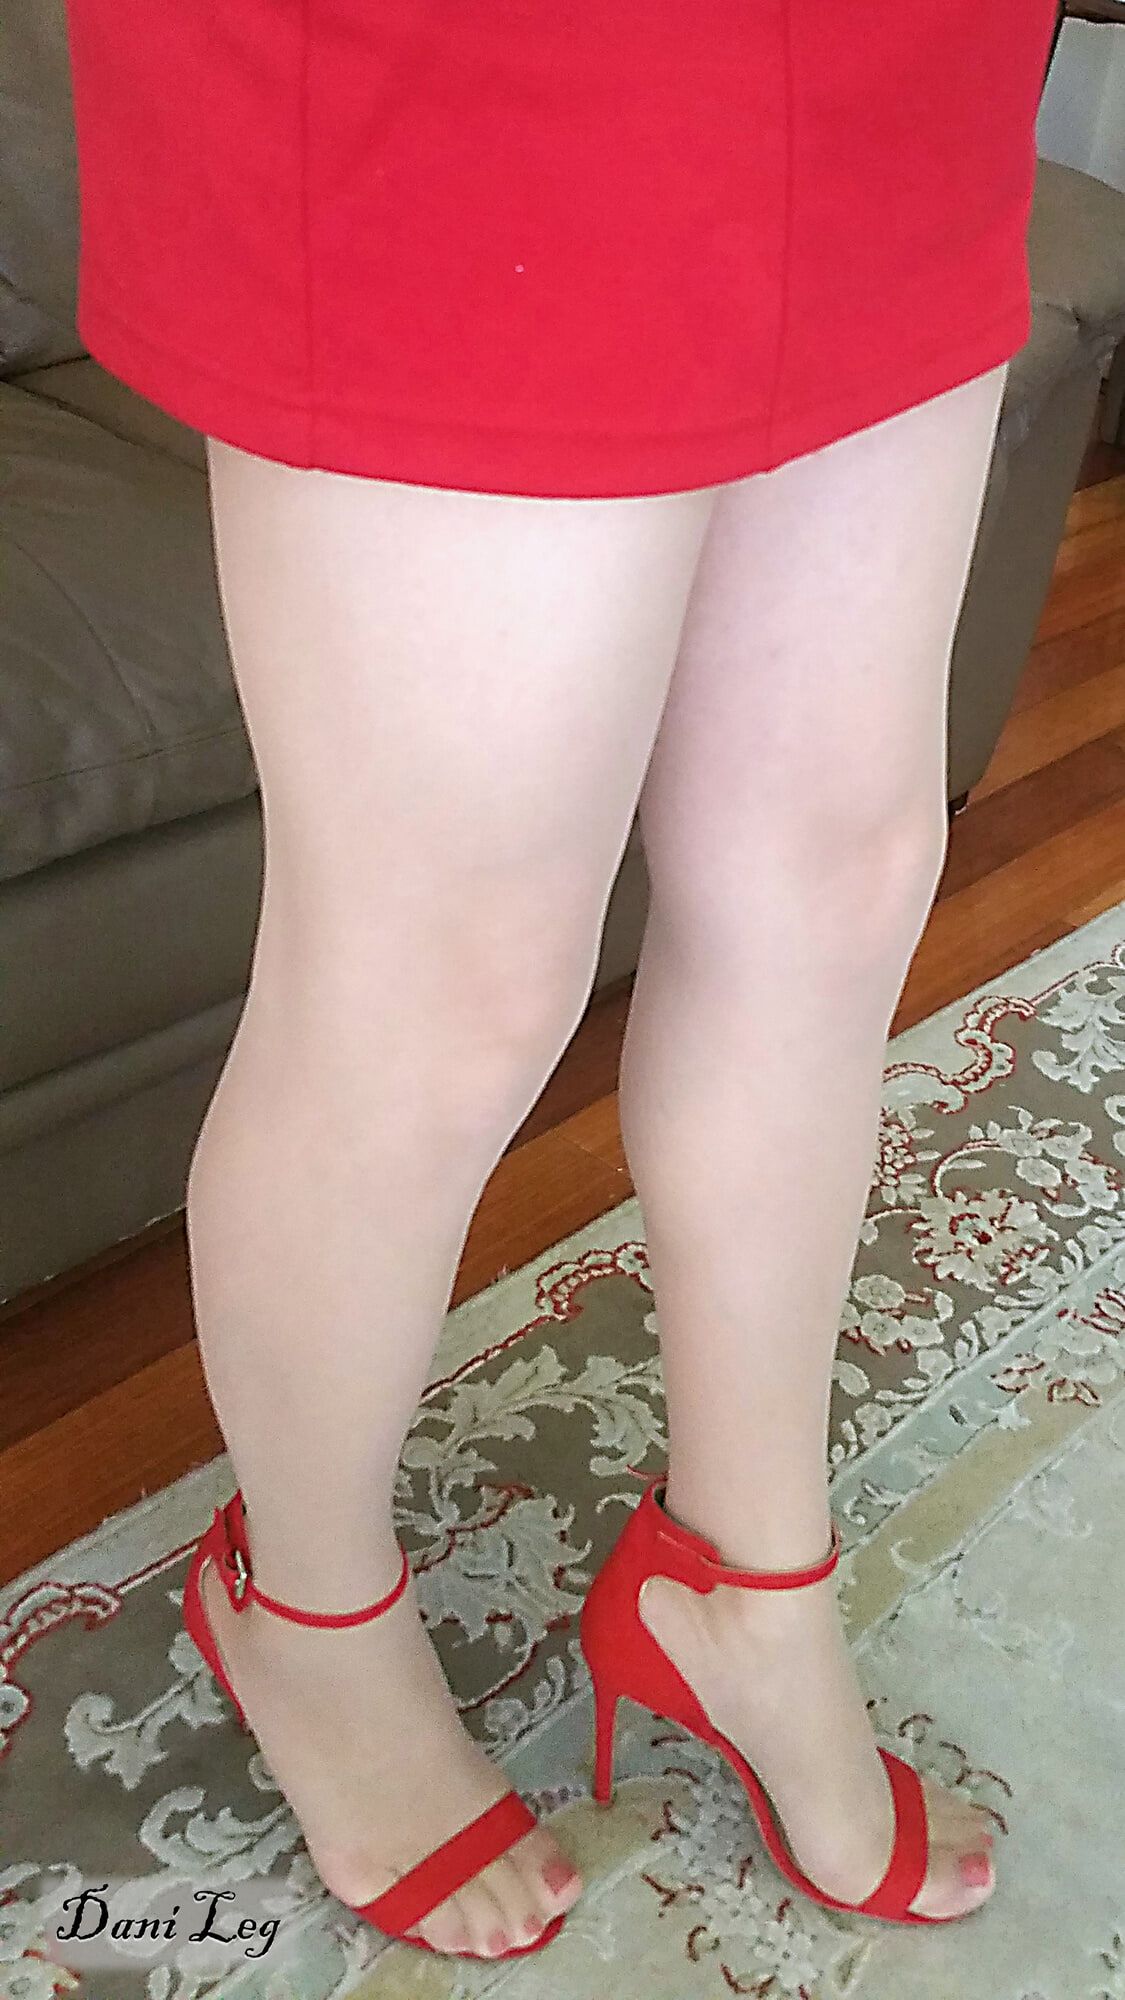 Curvy Legs, Nude Pantyhose and Hot Red Nails and Shoes #4